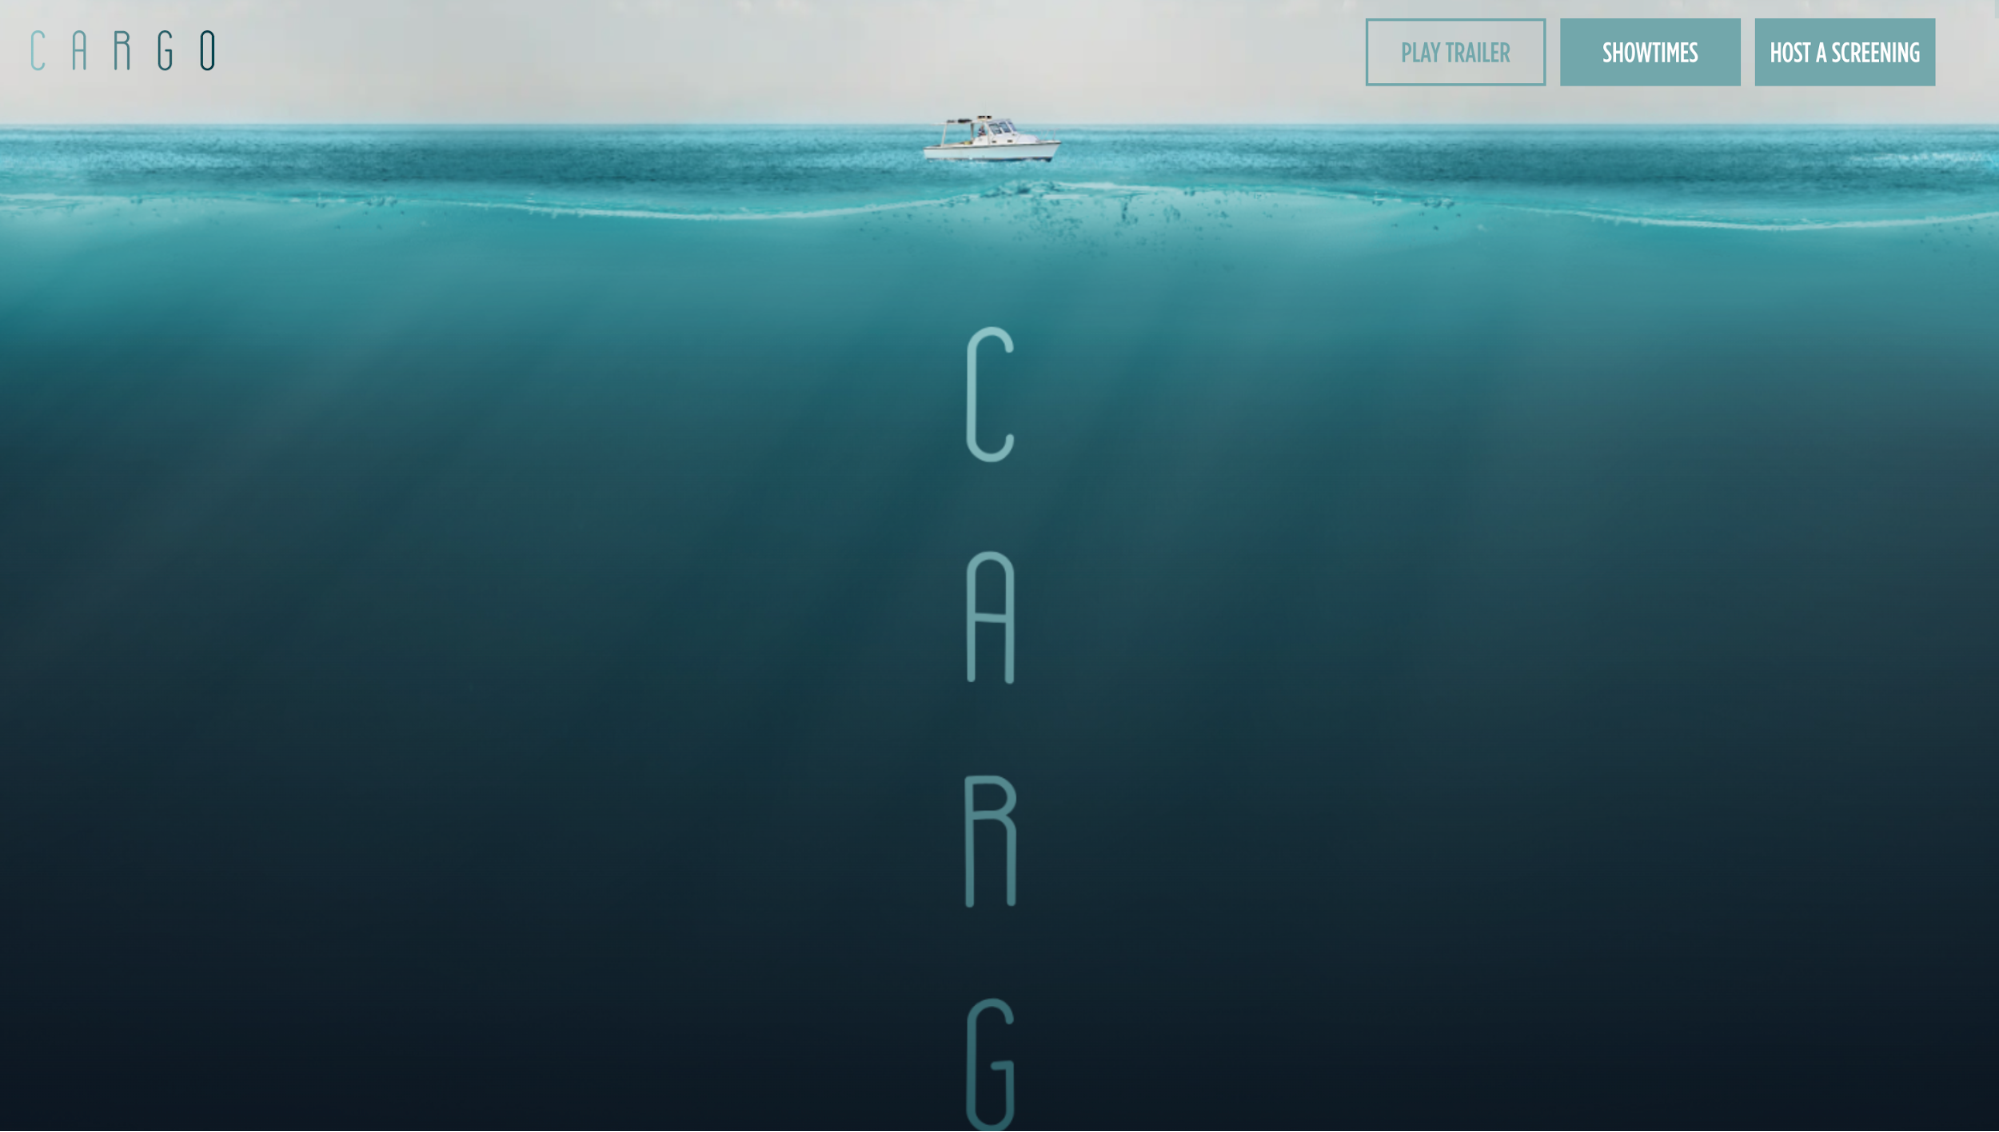 Vertical parallax scrolling of the movie title